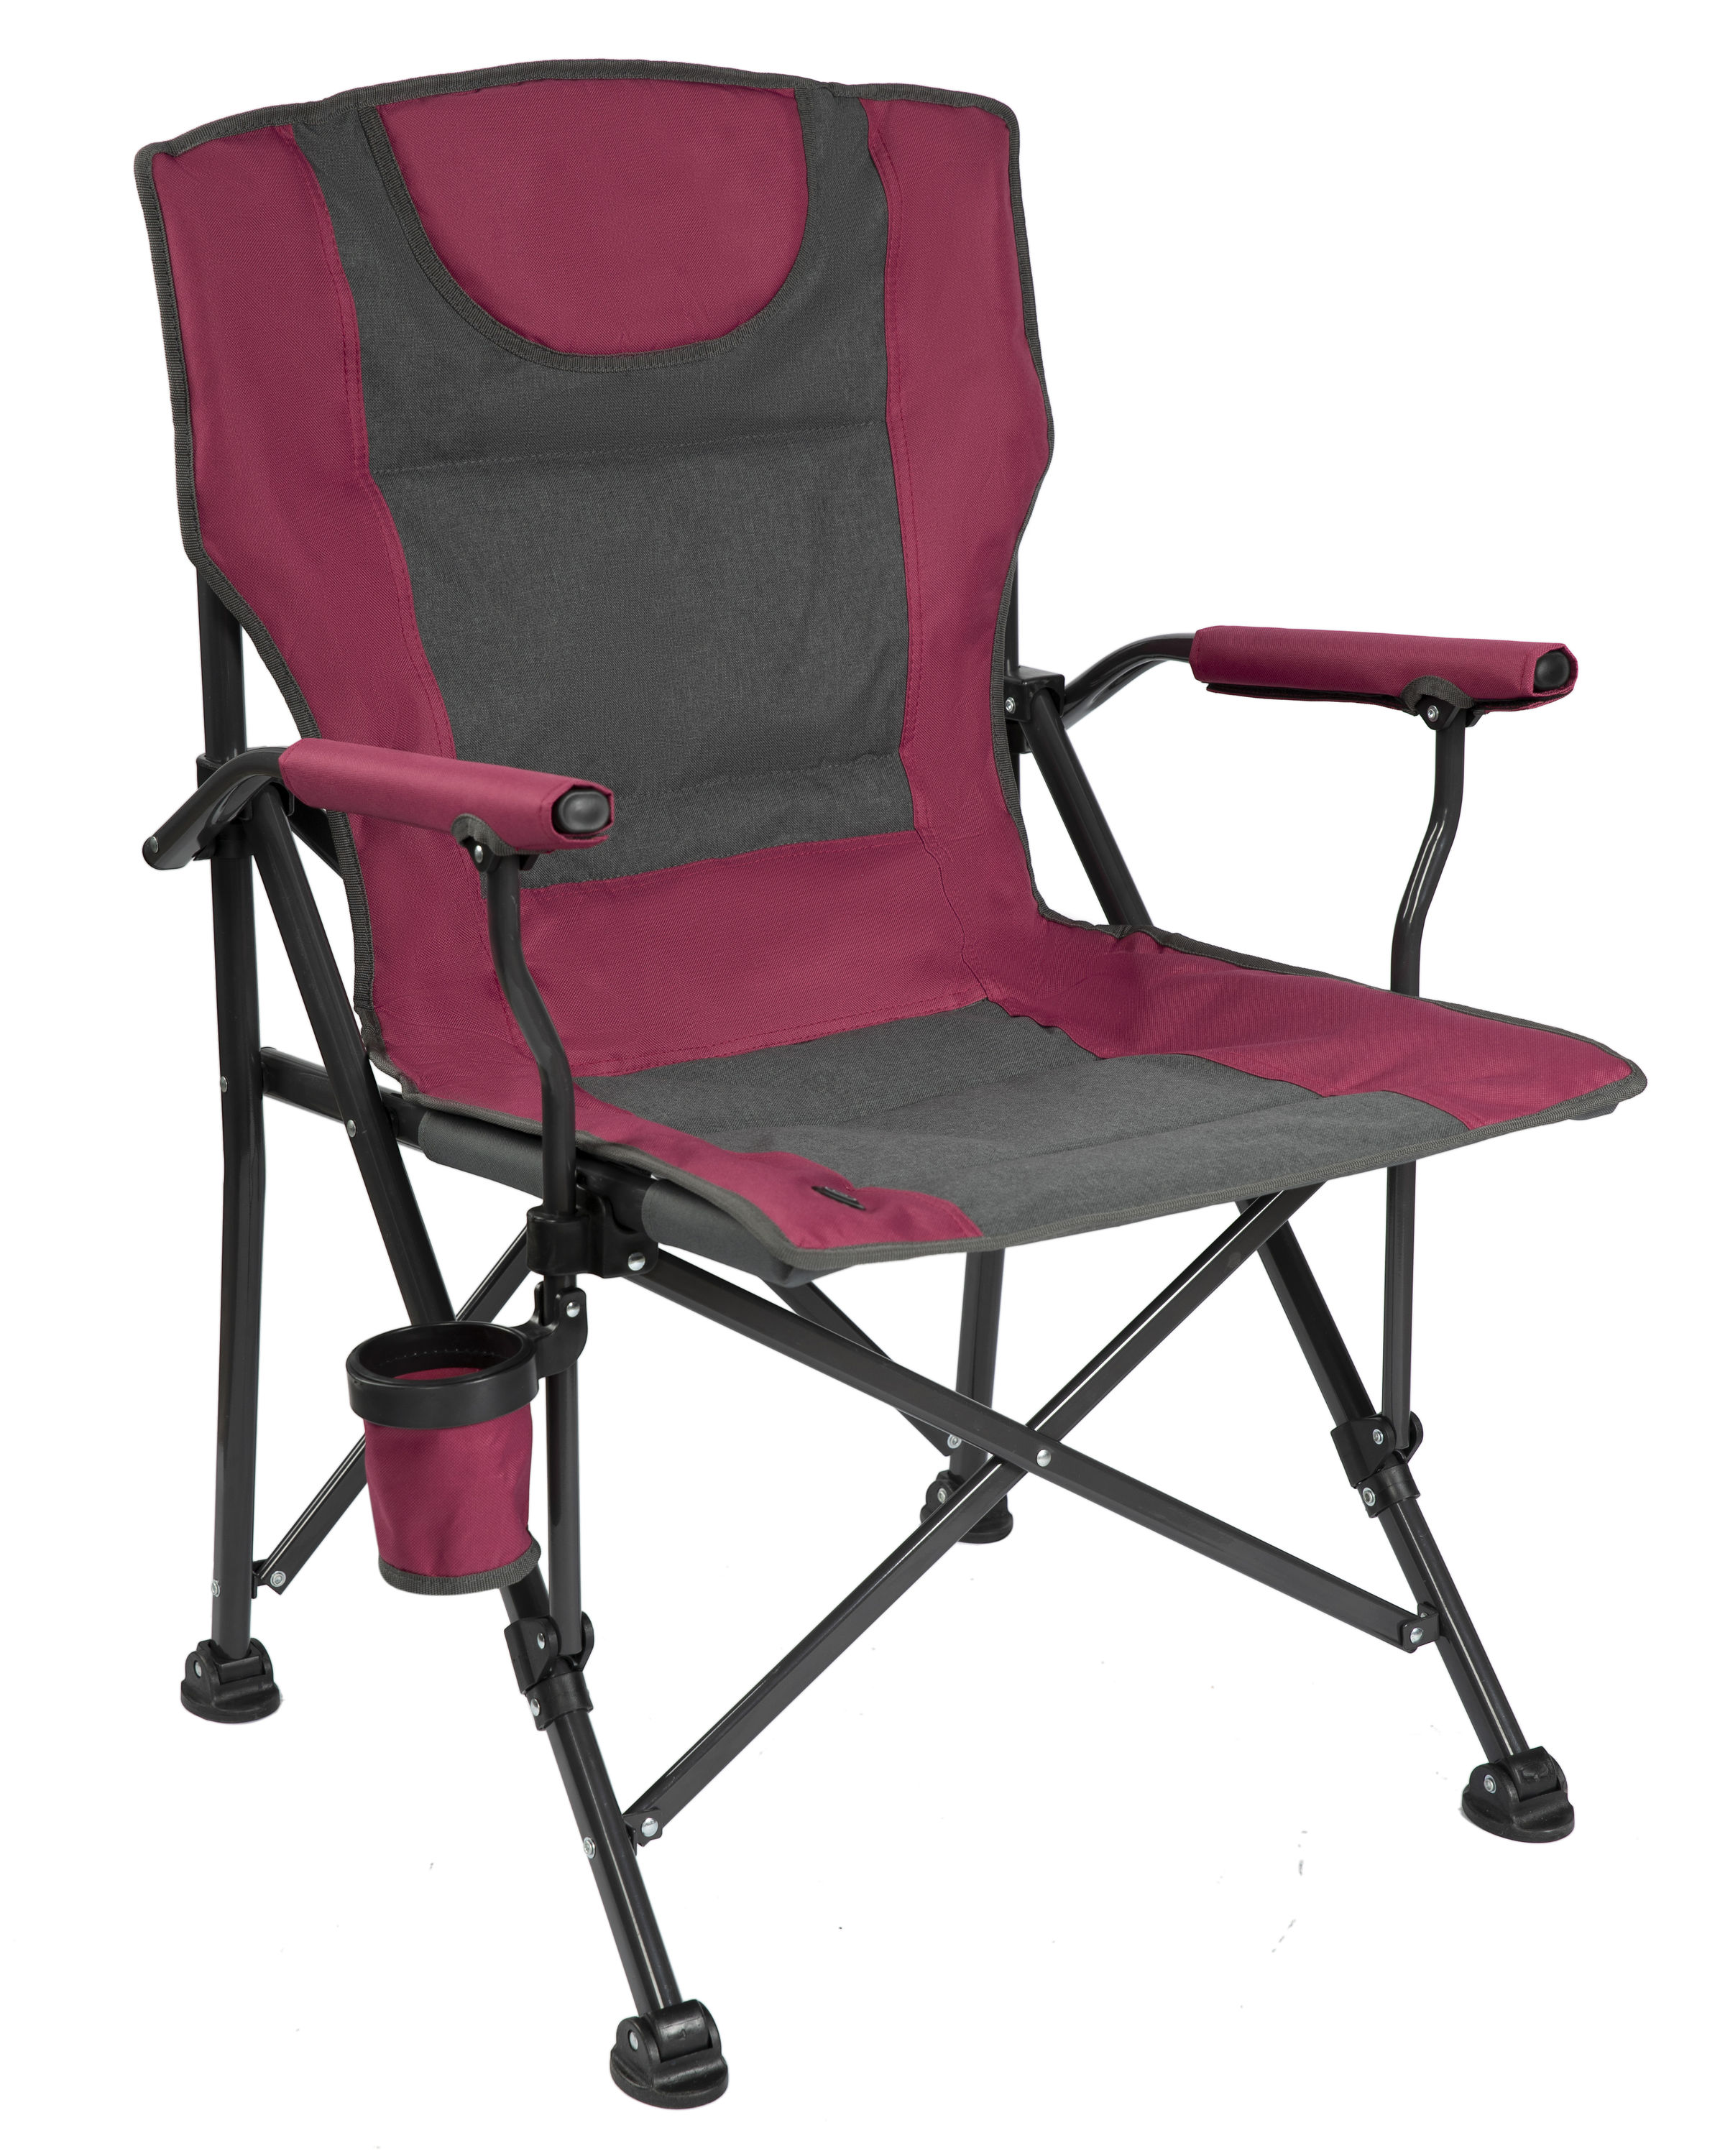 Backyard Expressions Polyester Red/Grey Folding Camping Chair